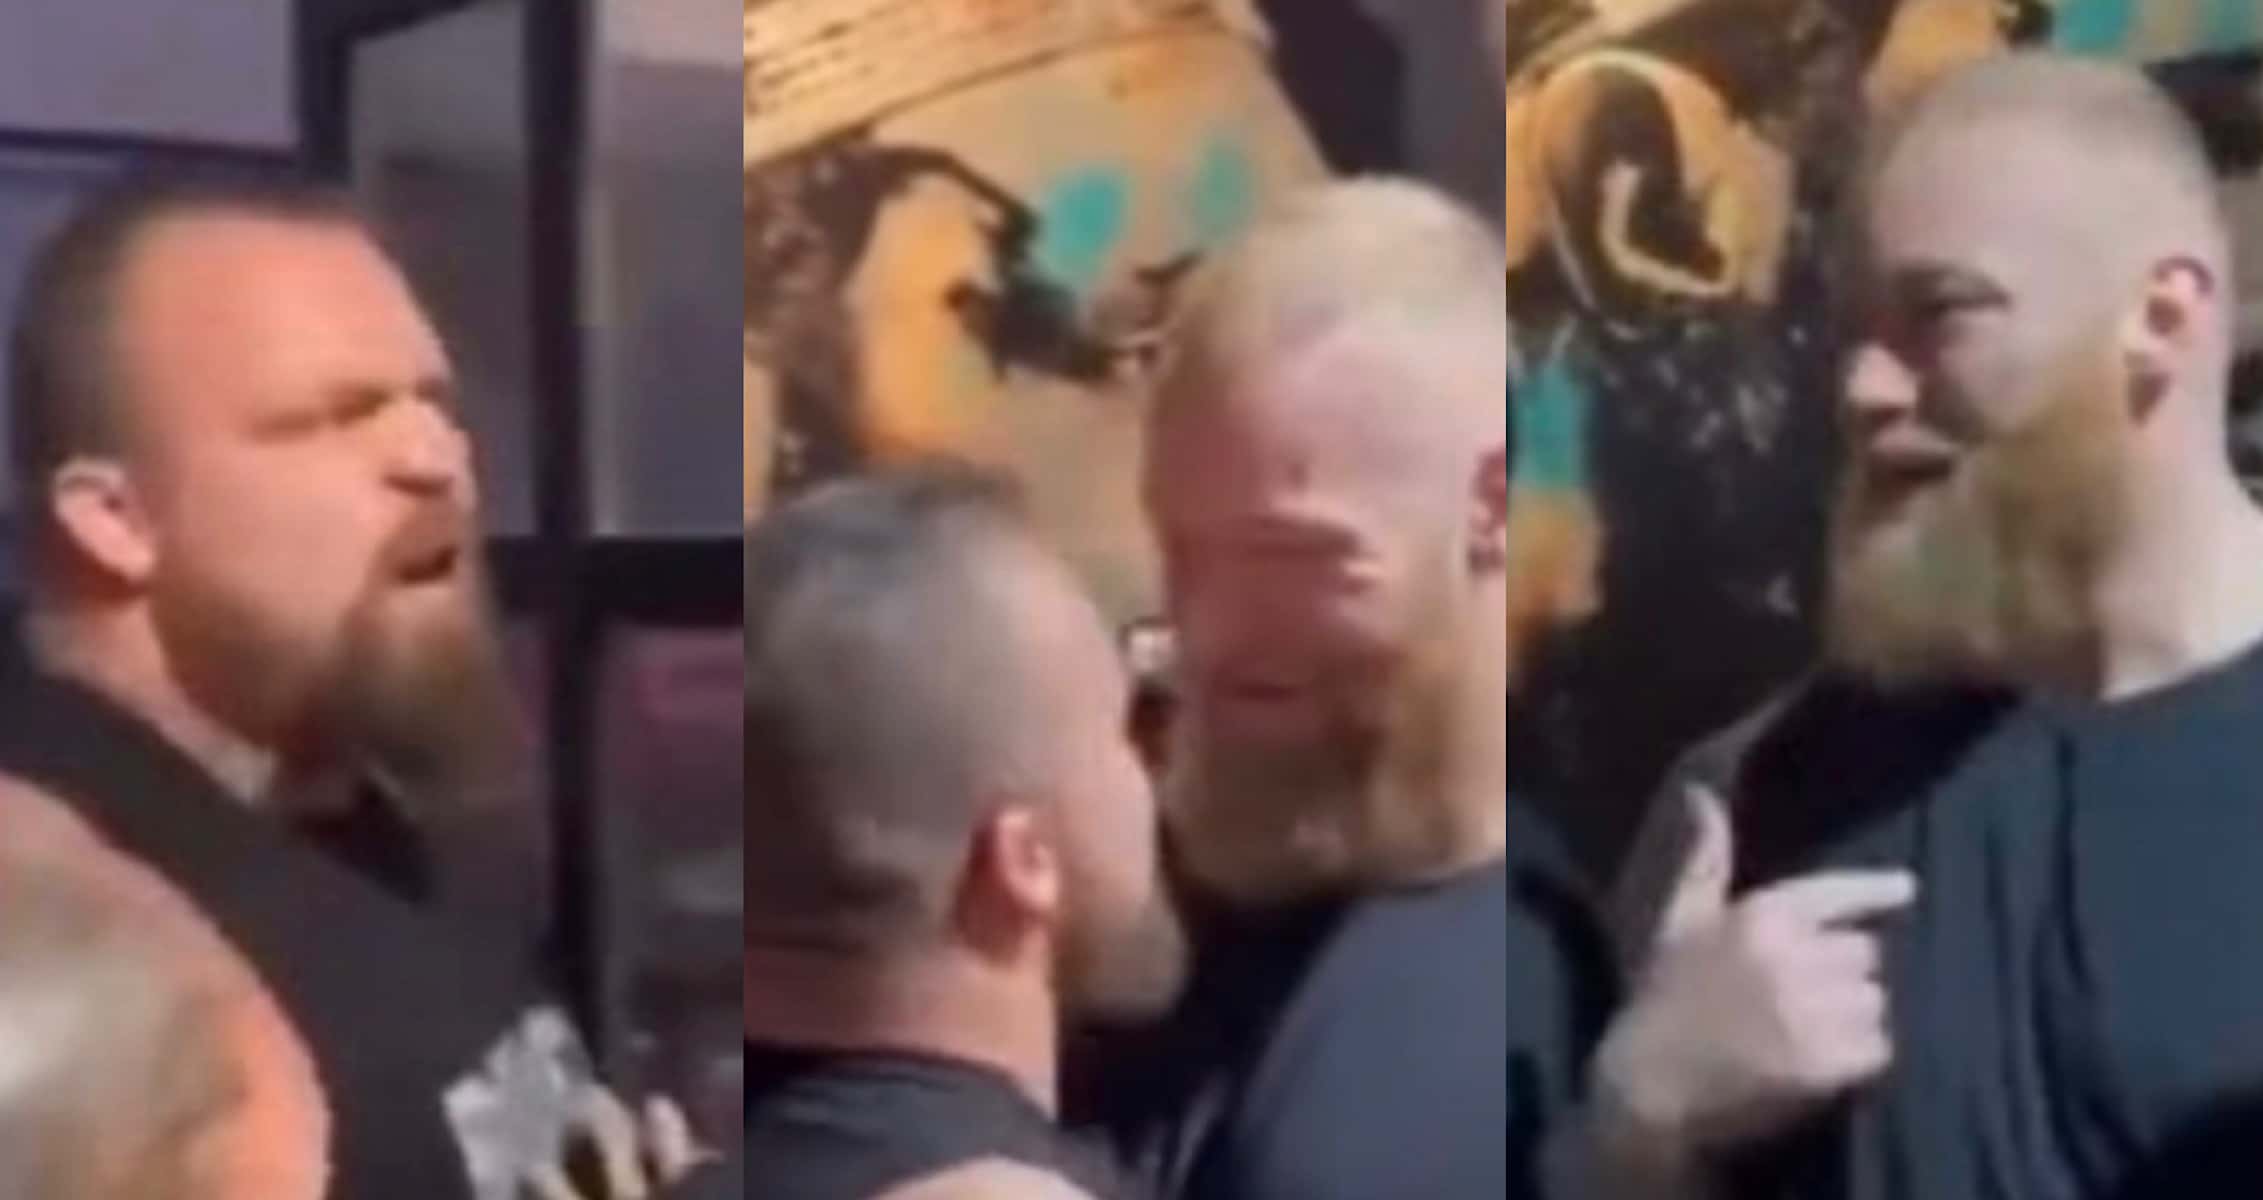 Thor Bjornsson and Eddie Hall Have Heated Face Off Ahead of Their Fight